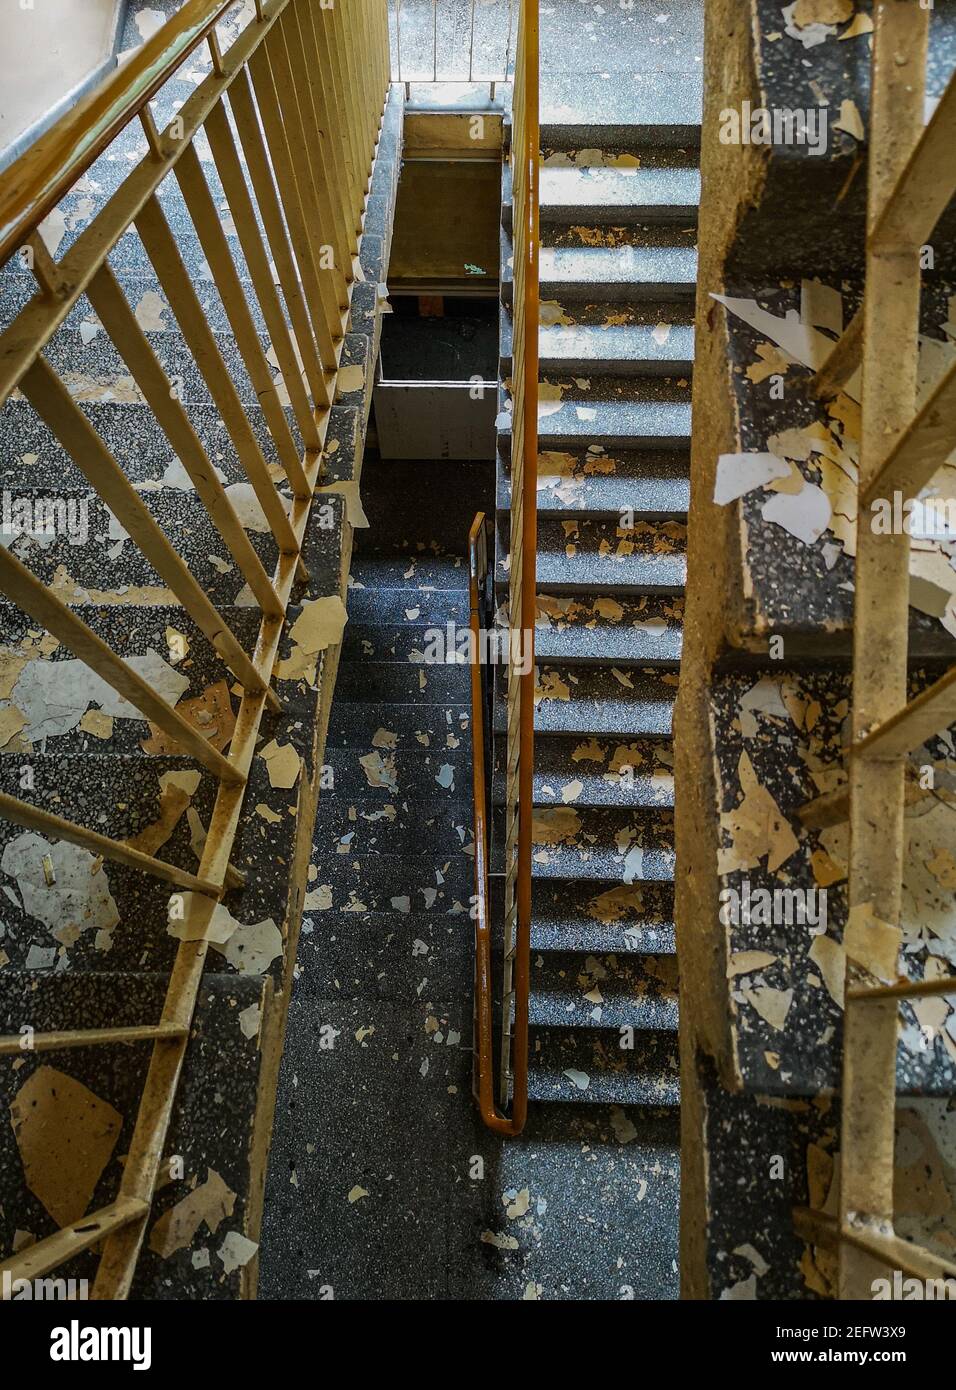 Top down view of concrete staircase with metal railings and peeled paintings from walls in old abandoned hospital Stock Photo